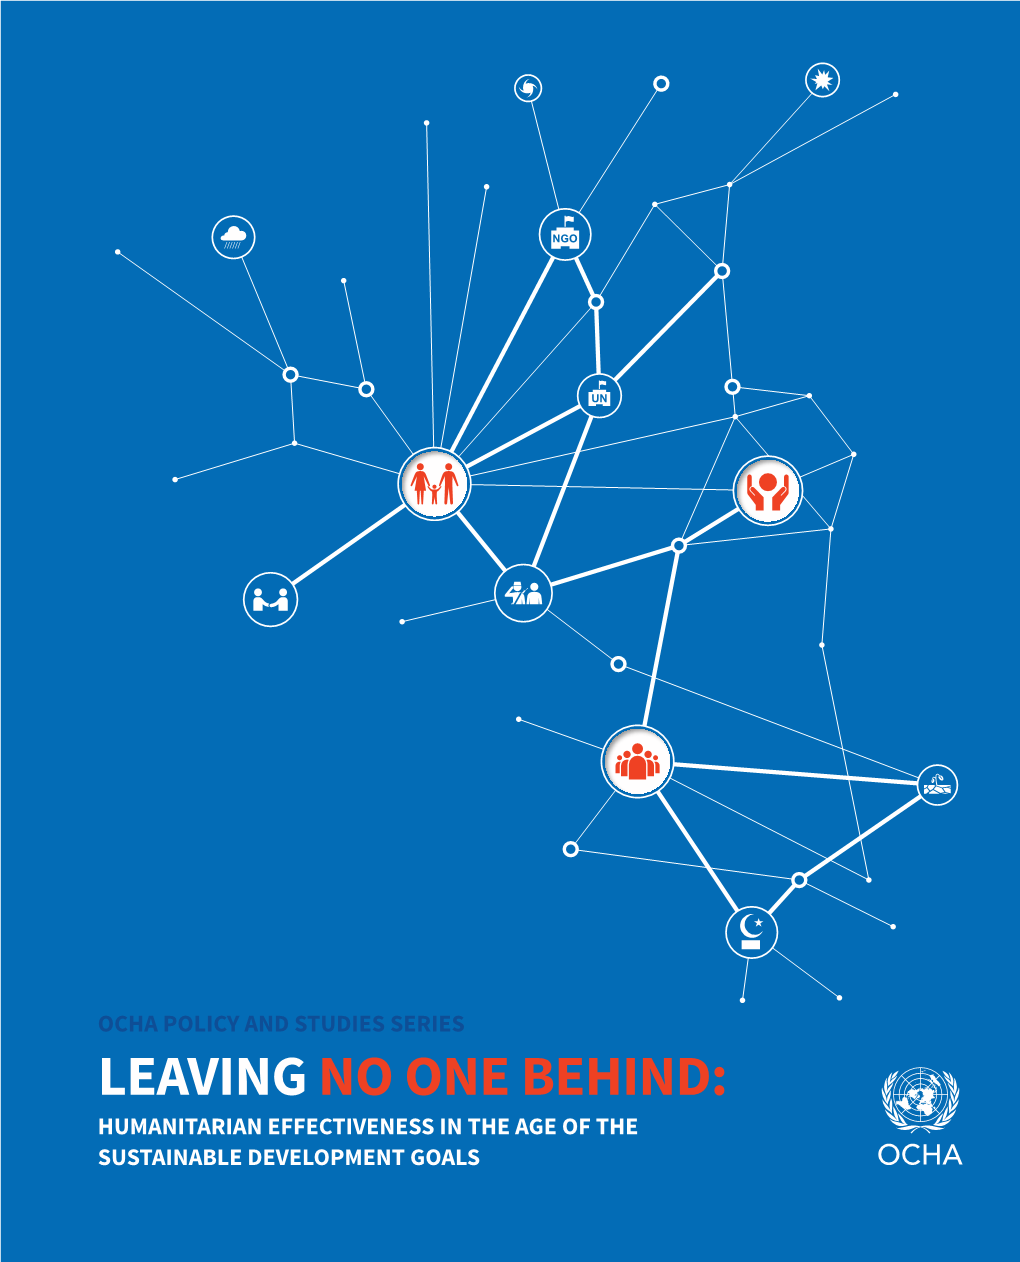 Leaving No One Behind: Humanitarian Effectiveness in the Age of the Sustainable Development Goals